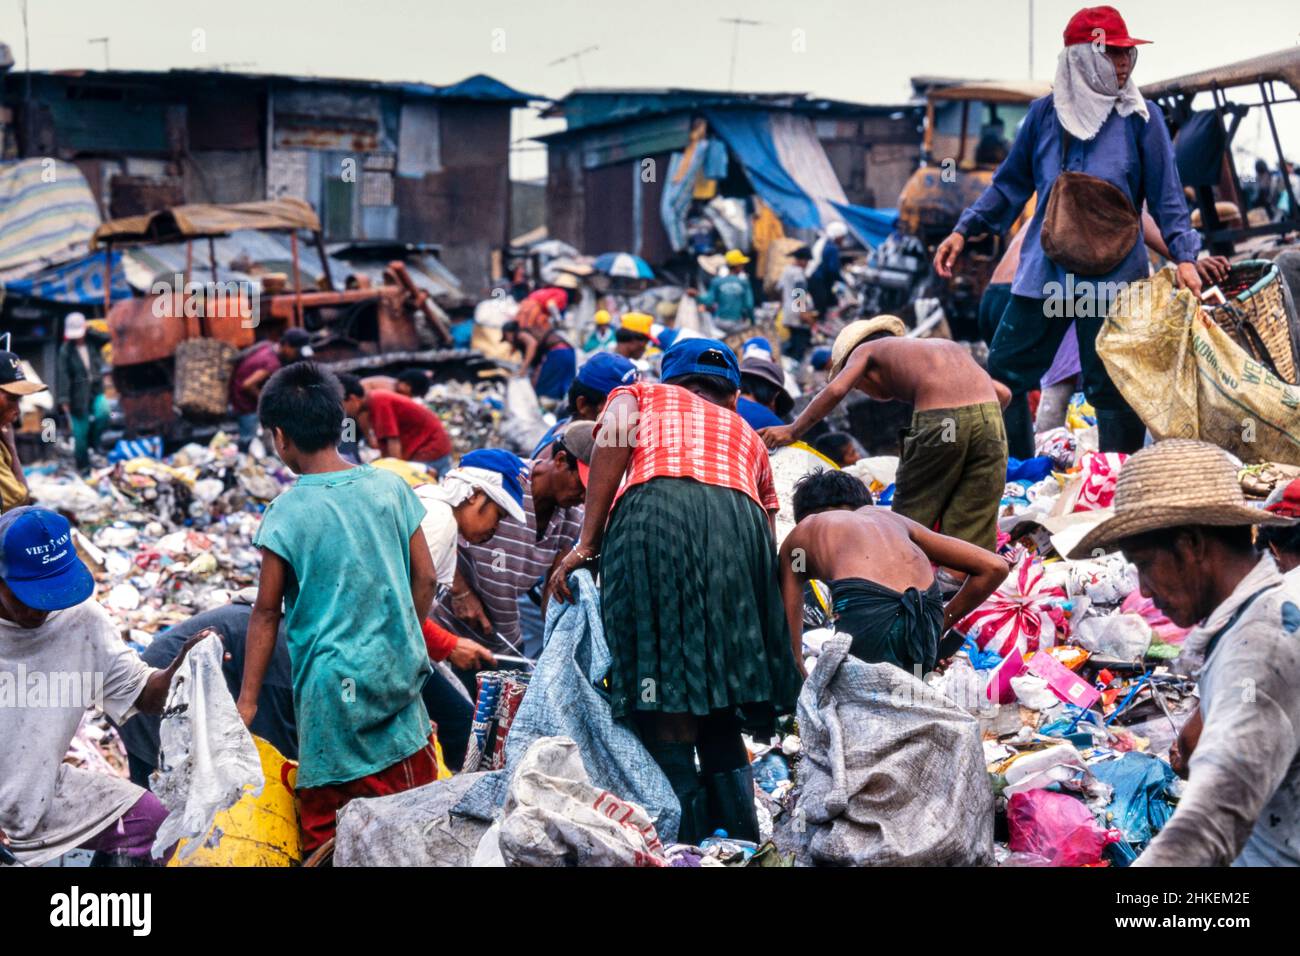 Scavengers on rubbish tip in Tondo, Manila, Philippines. People living among the garbage, and recycling what they can. Stock Photo